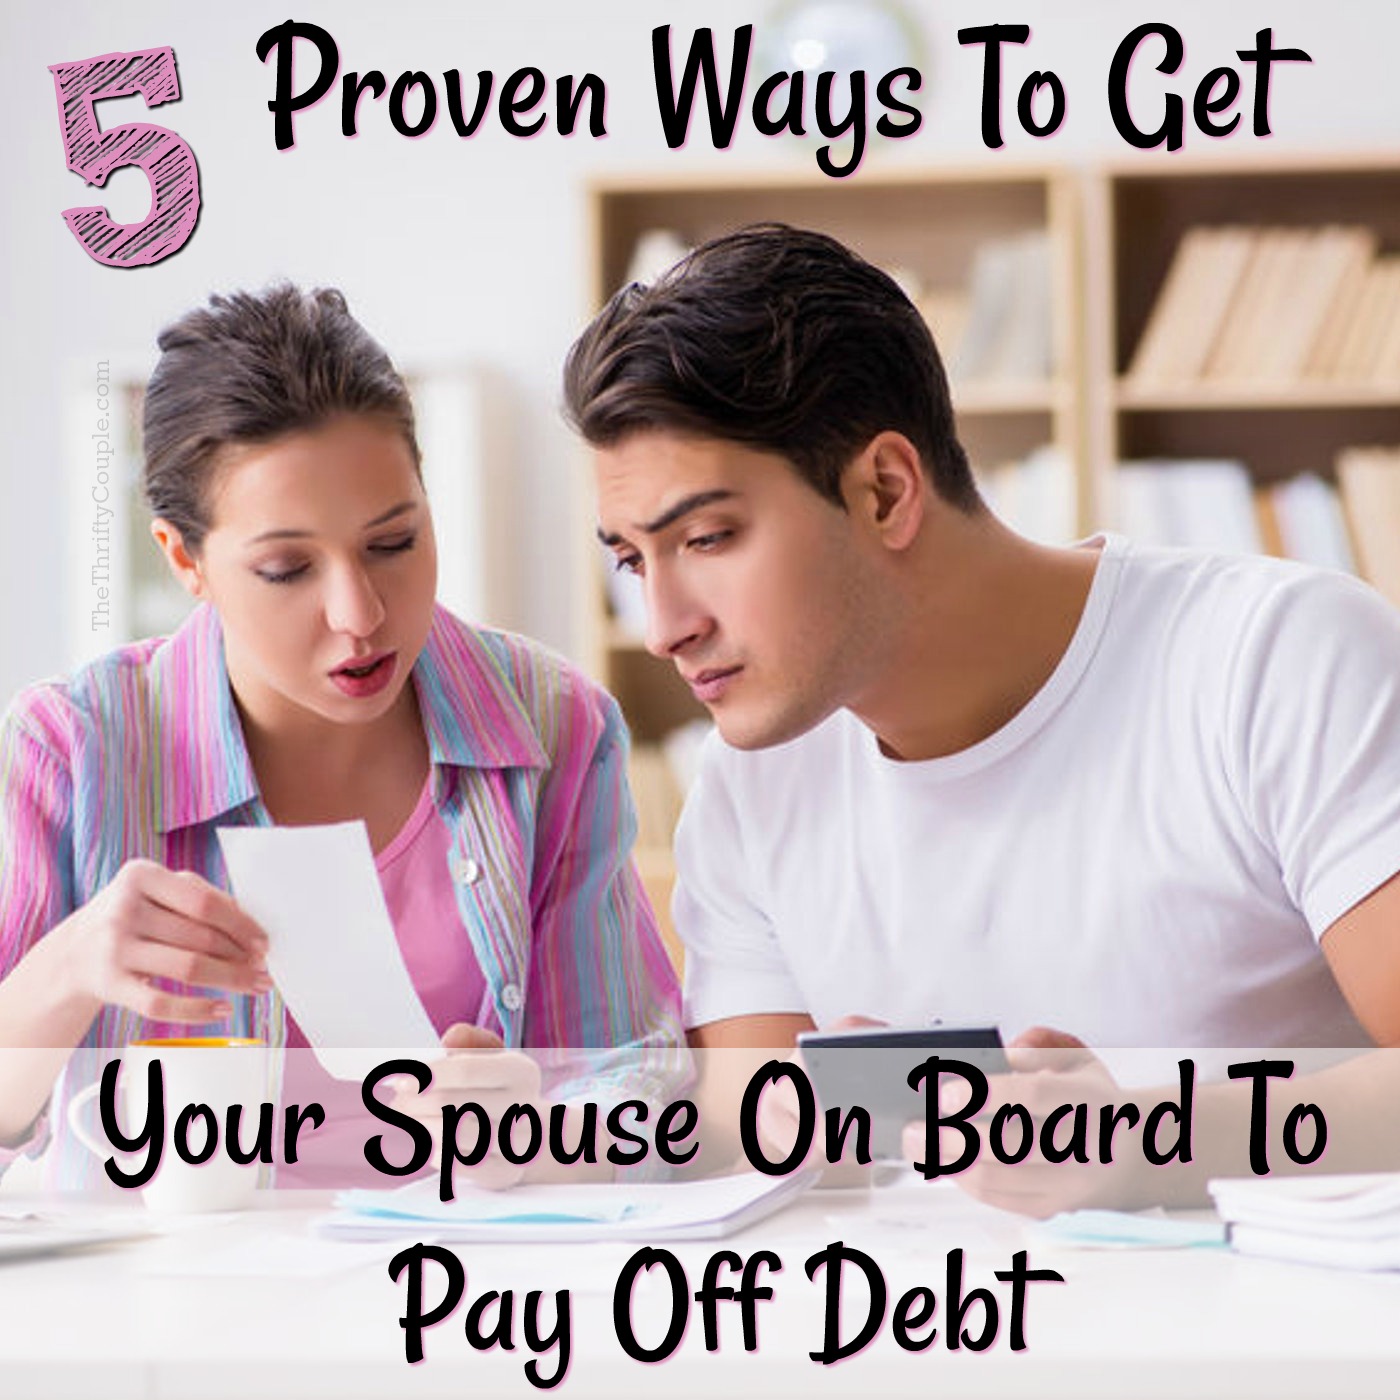 TTC 008 5 Proven Ways to Get Your Spouse on Board to Pay Off Debt